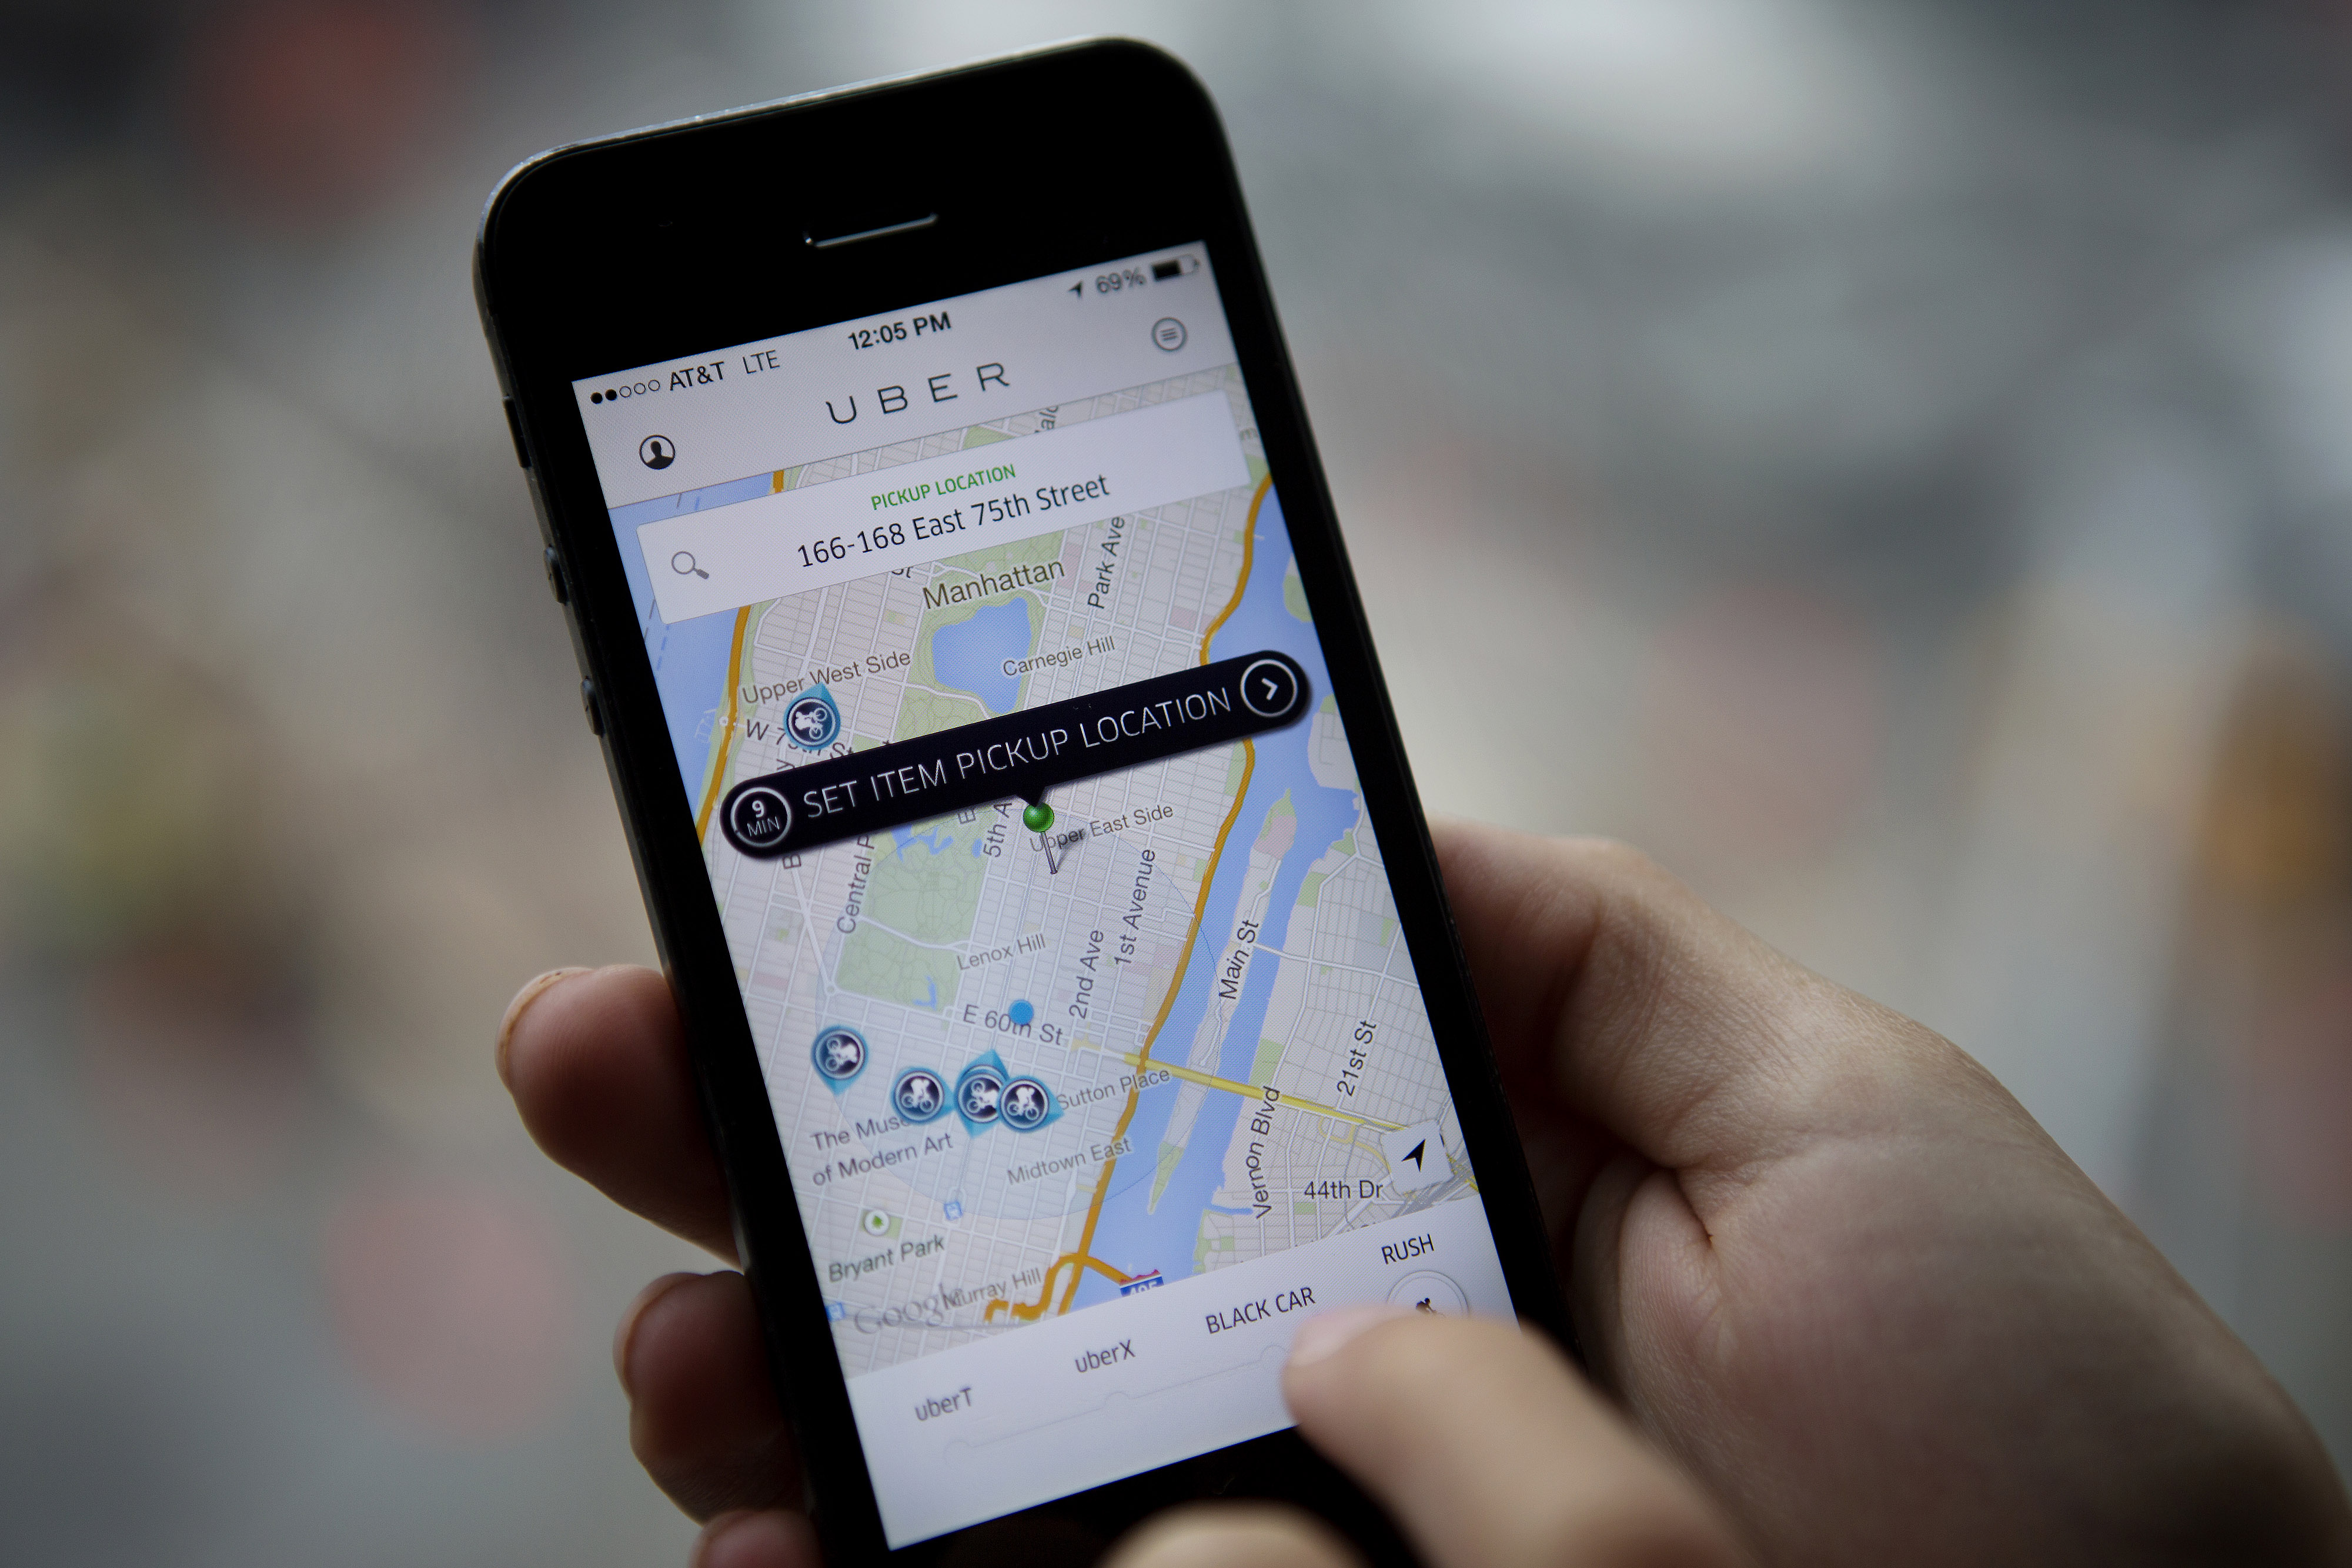 The Uber app is demonstrated for a photograph on an iPhone in New York on Aug. 6, 2014. (Bloomberg via Getty Images)